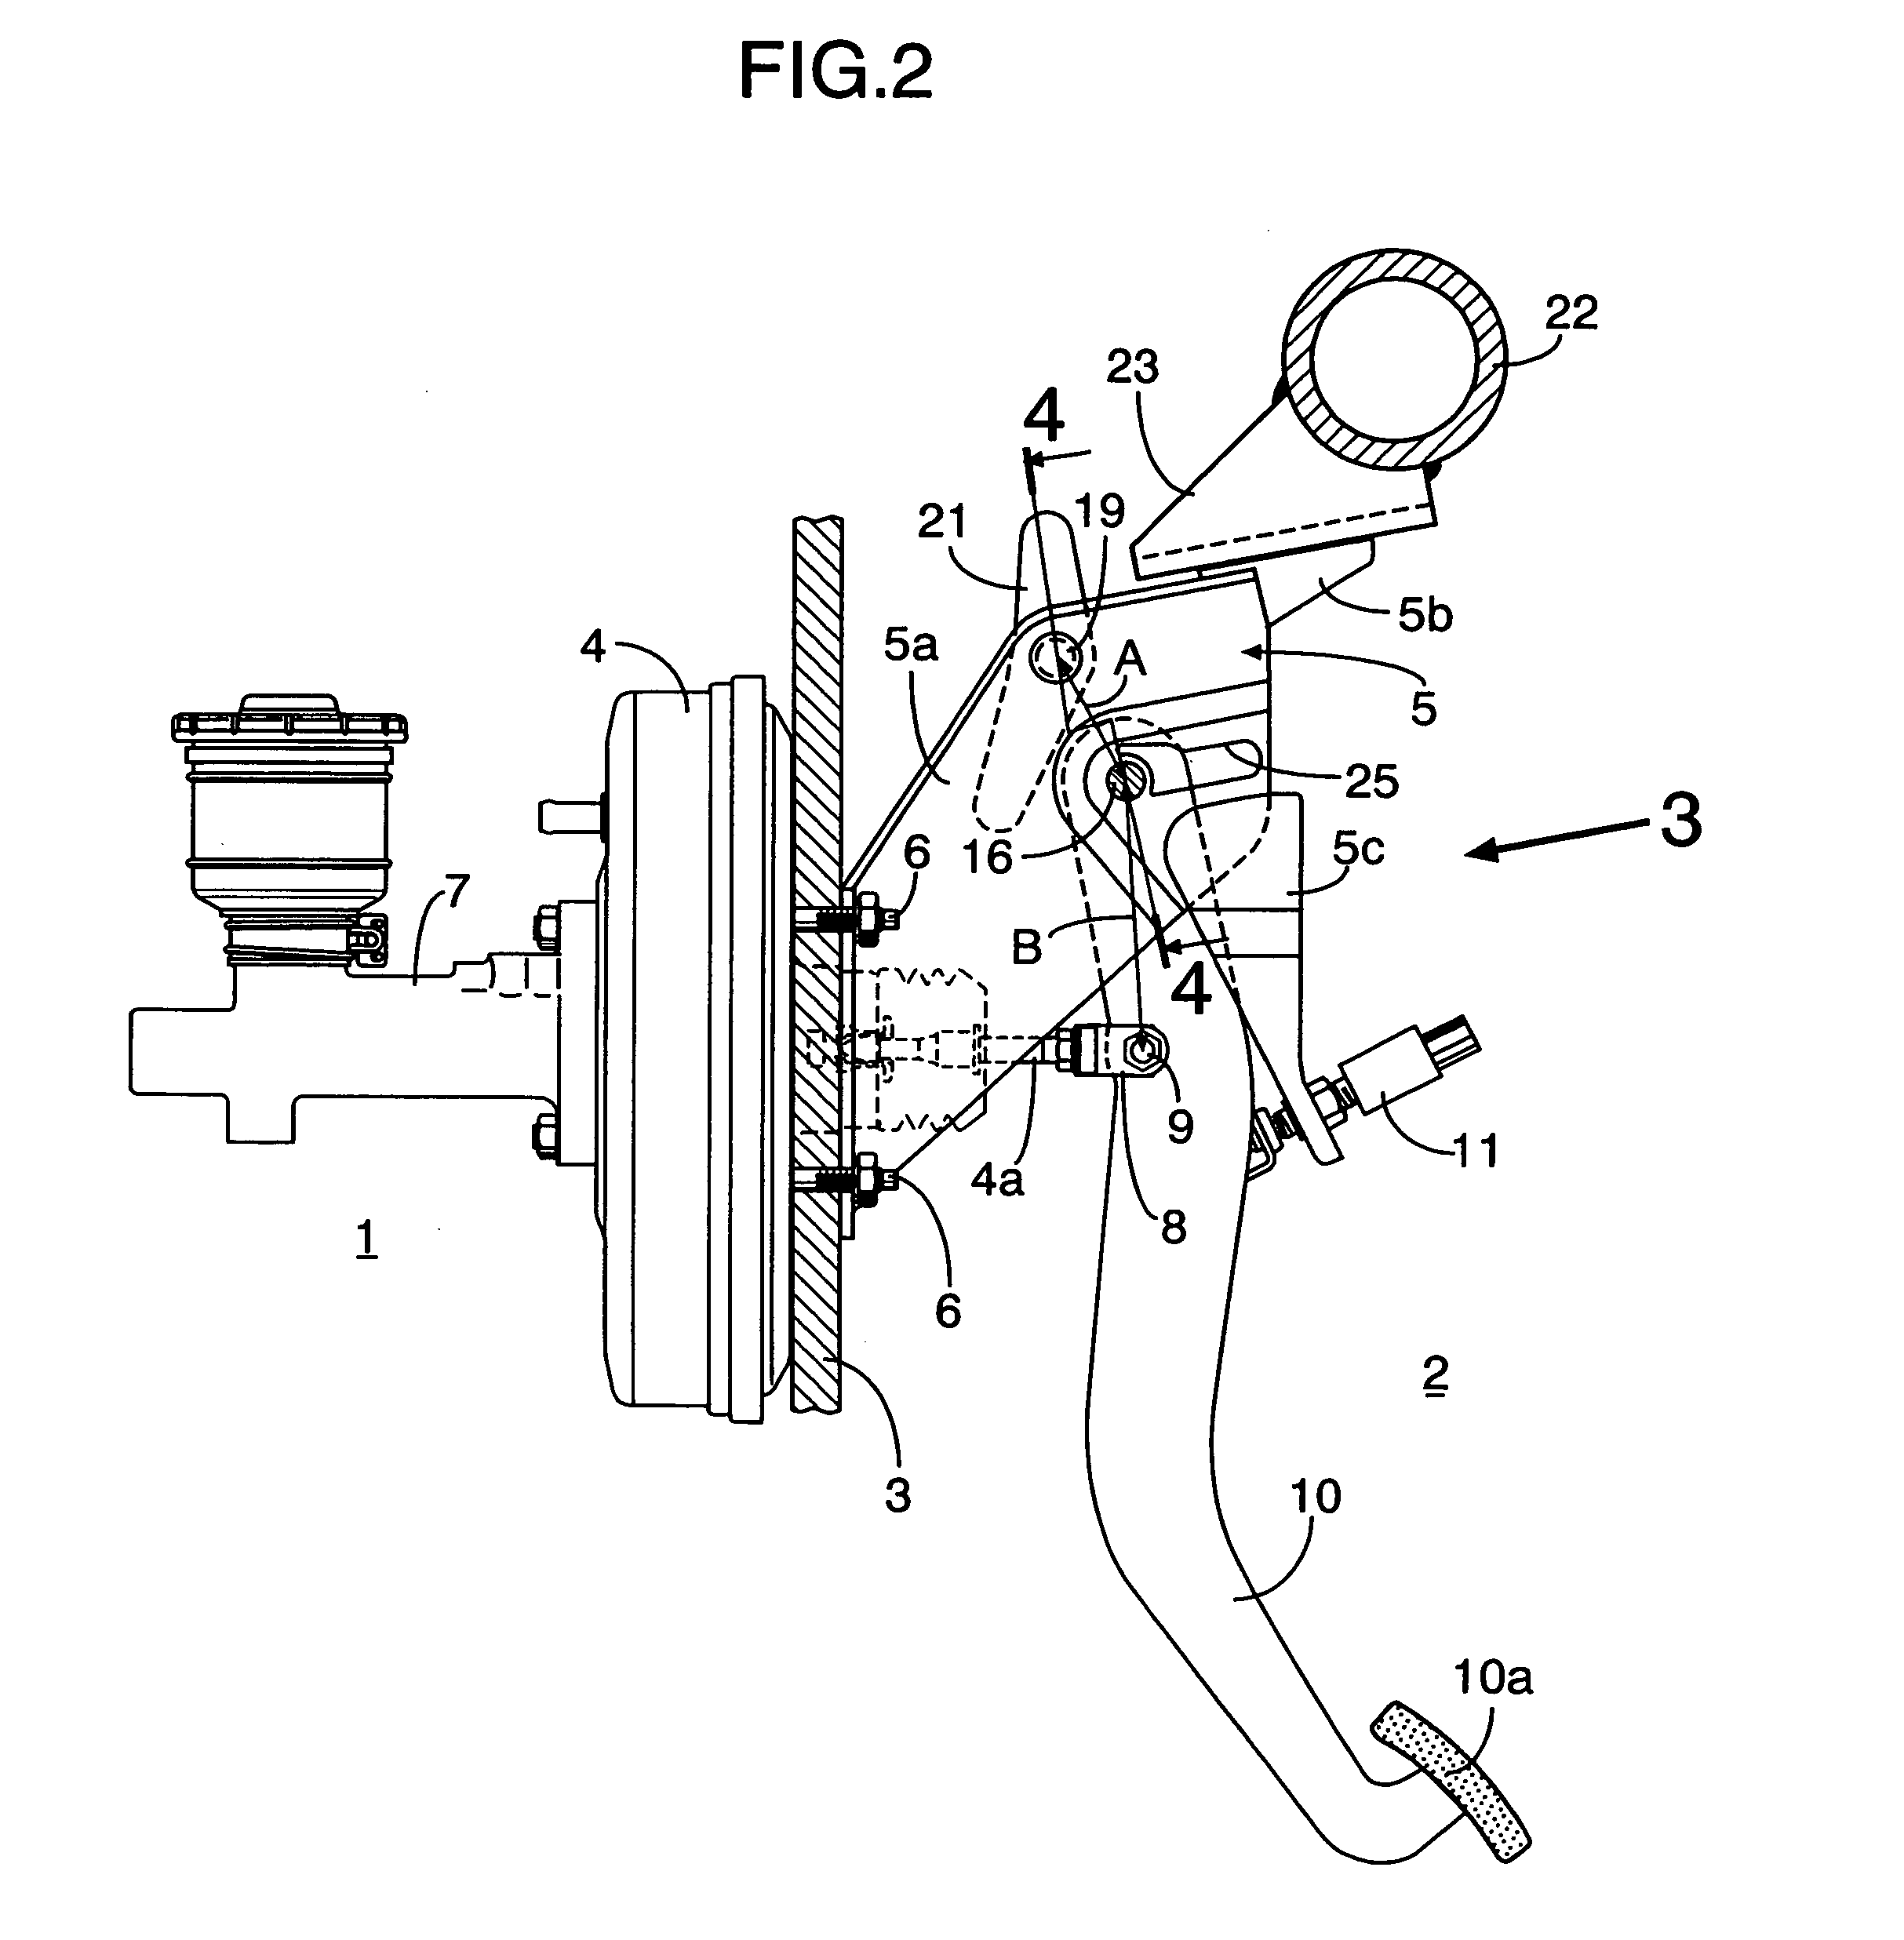 Operating pedal system of automobile